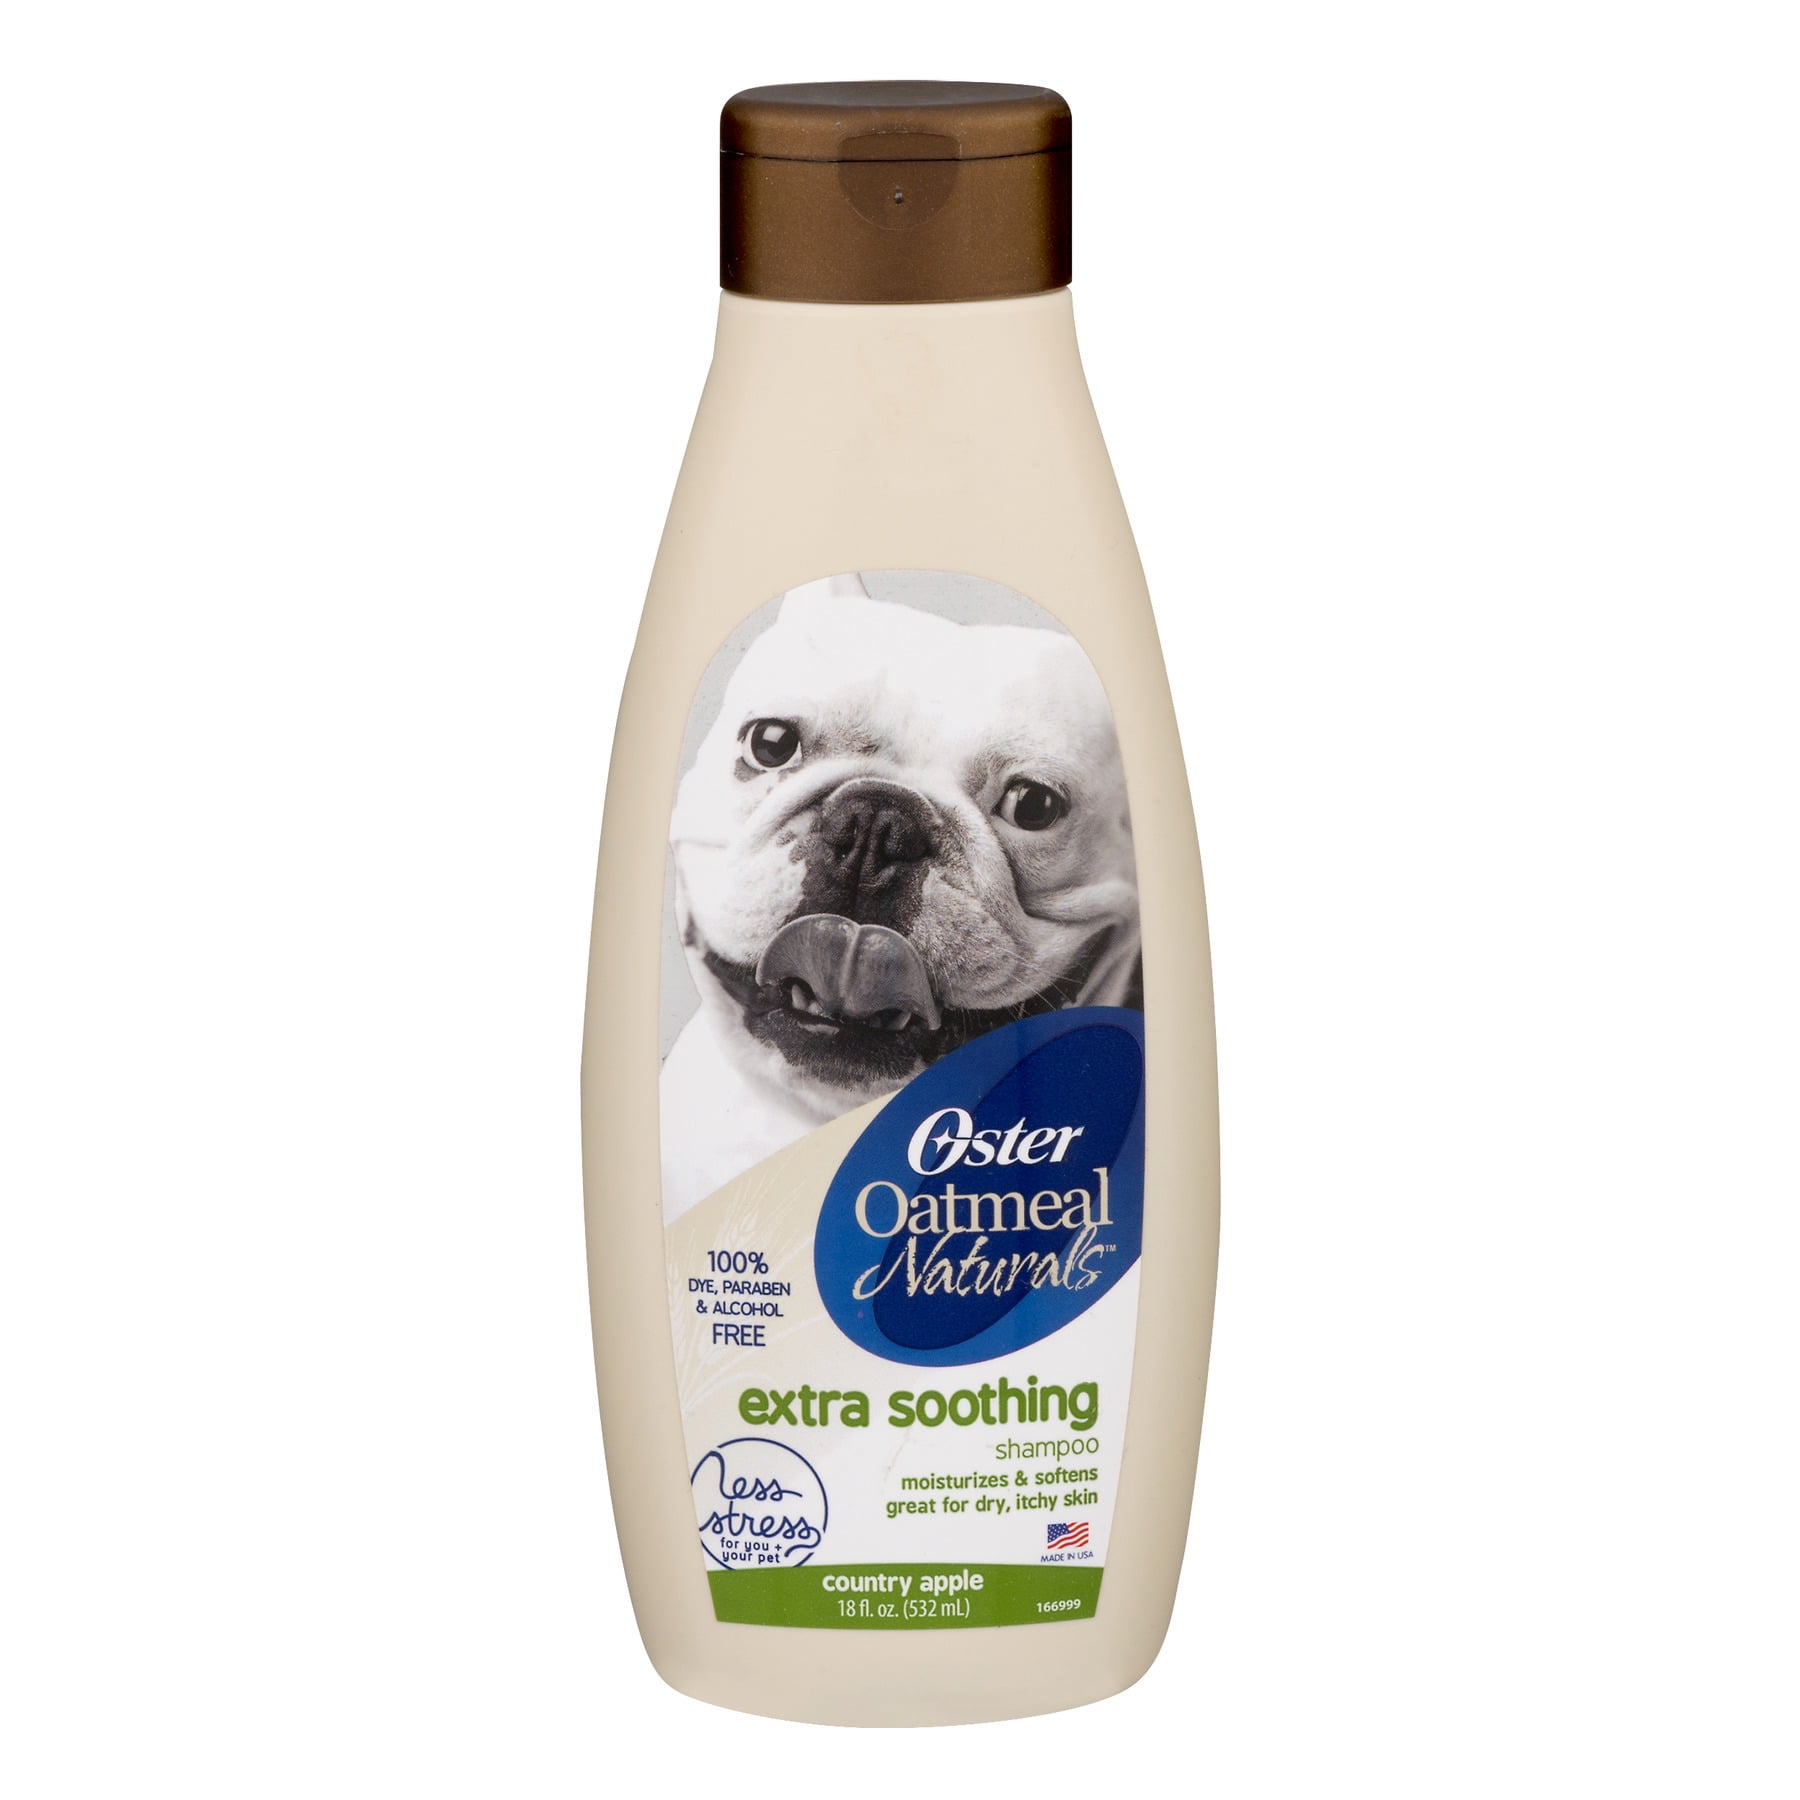 Oster Oatmeal Naturals Extra Soothing Dog Shampoo, Country Apple, 18 oz.